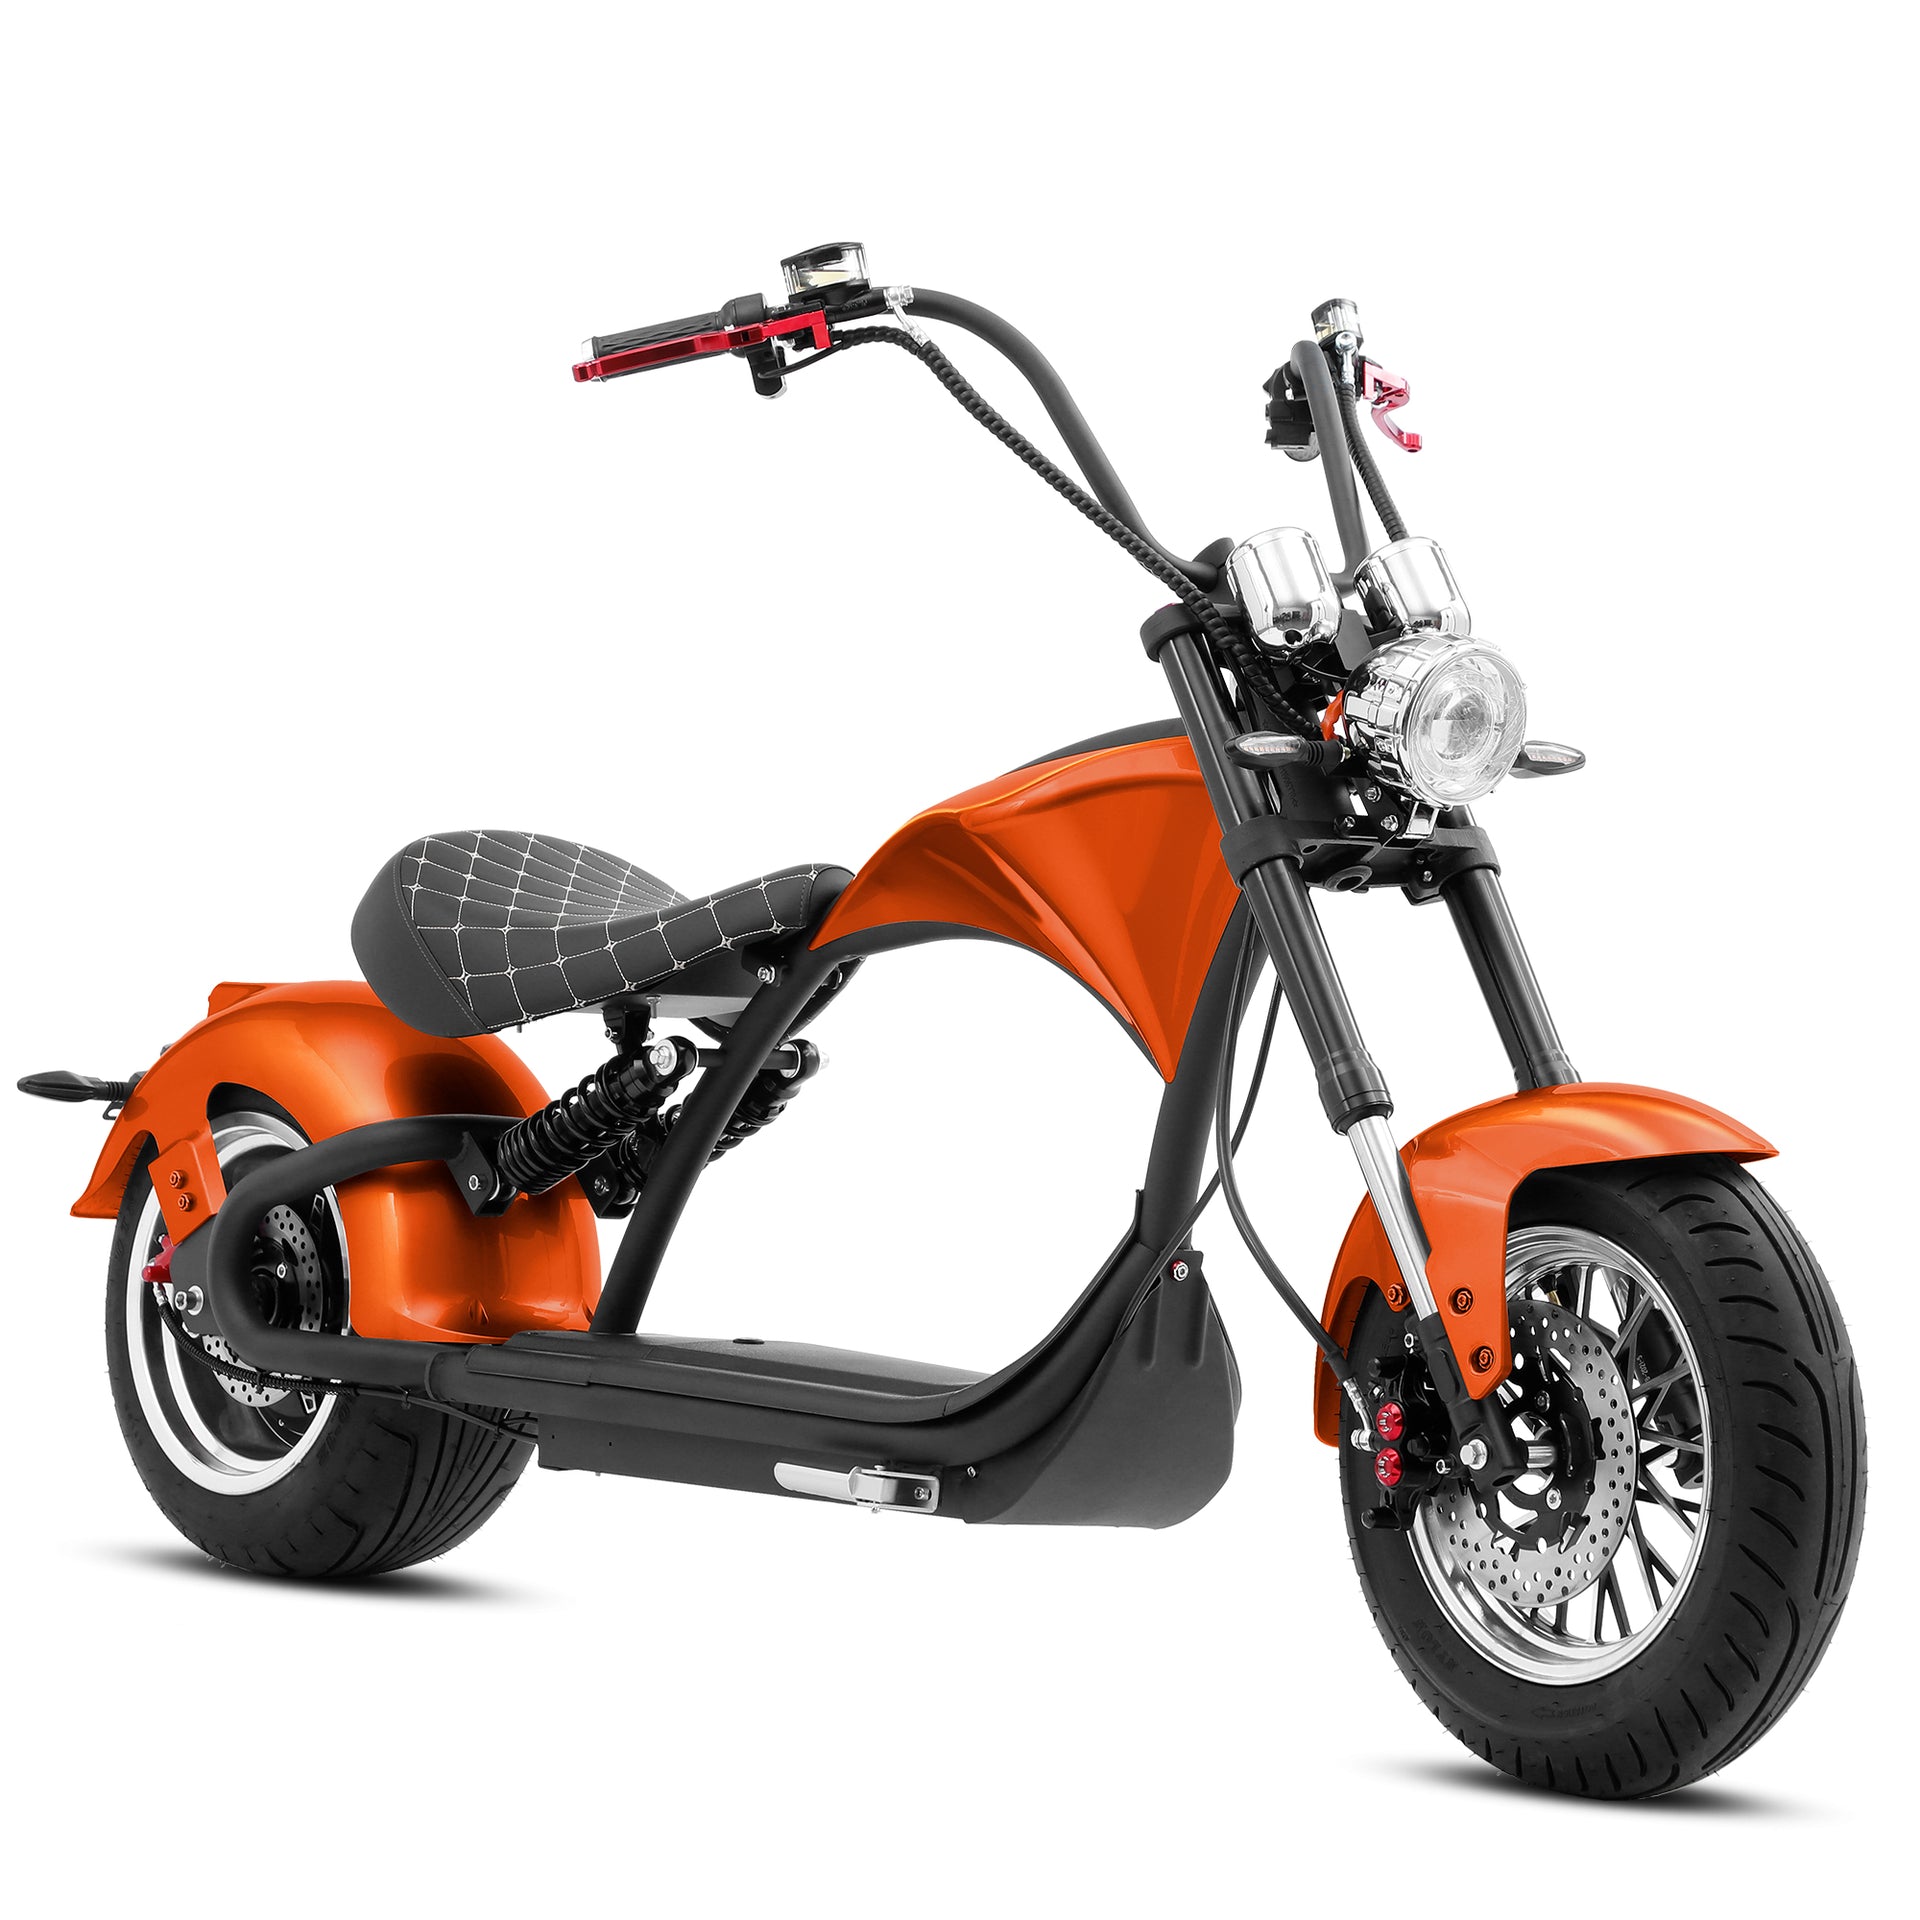 Eahora Emars M1P 2000W Electric Scooter With 60V 30AH 1.8KWH Battery - 37MPH -Orange